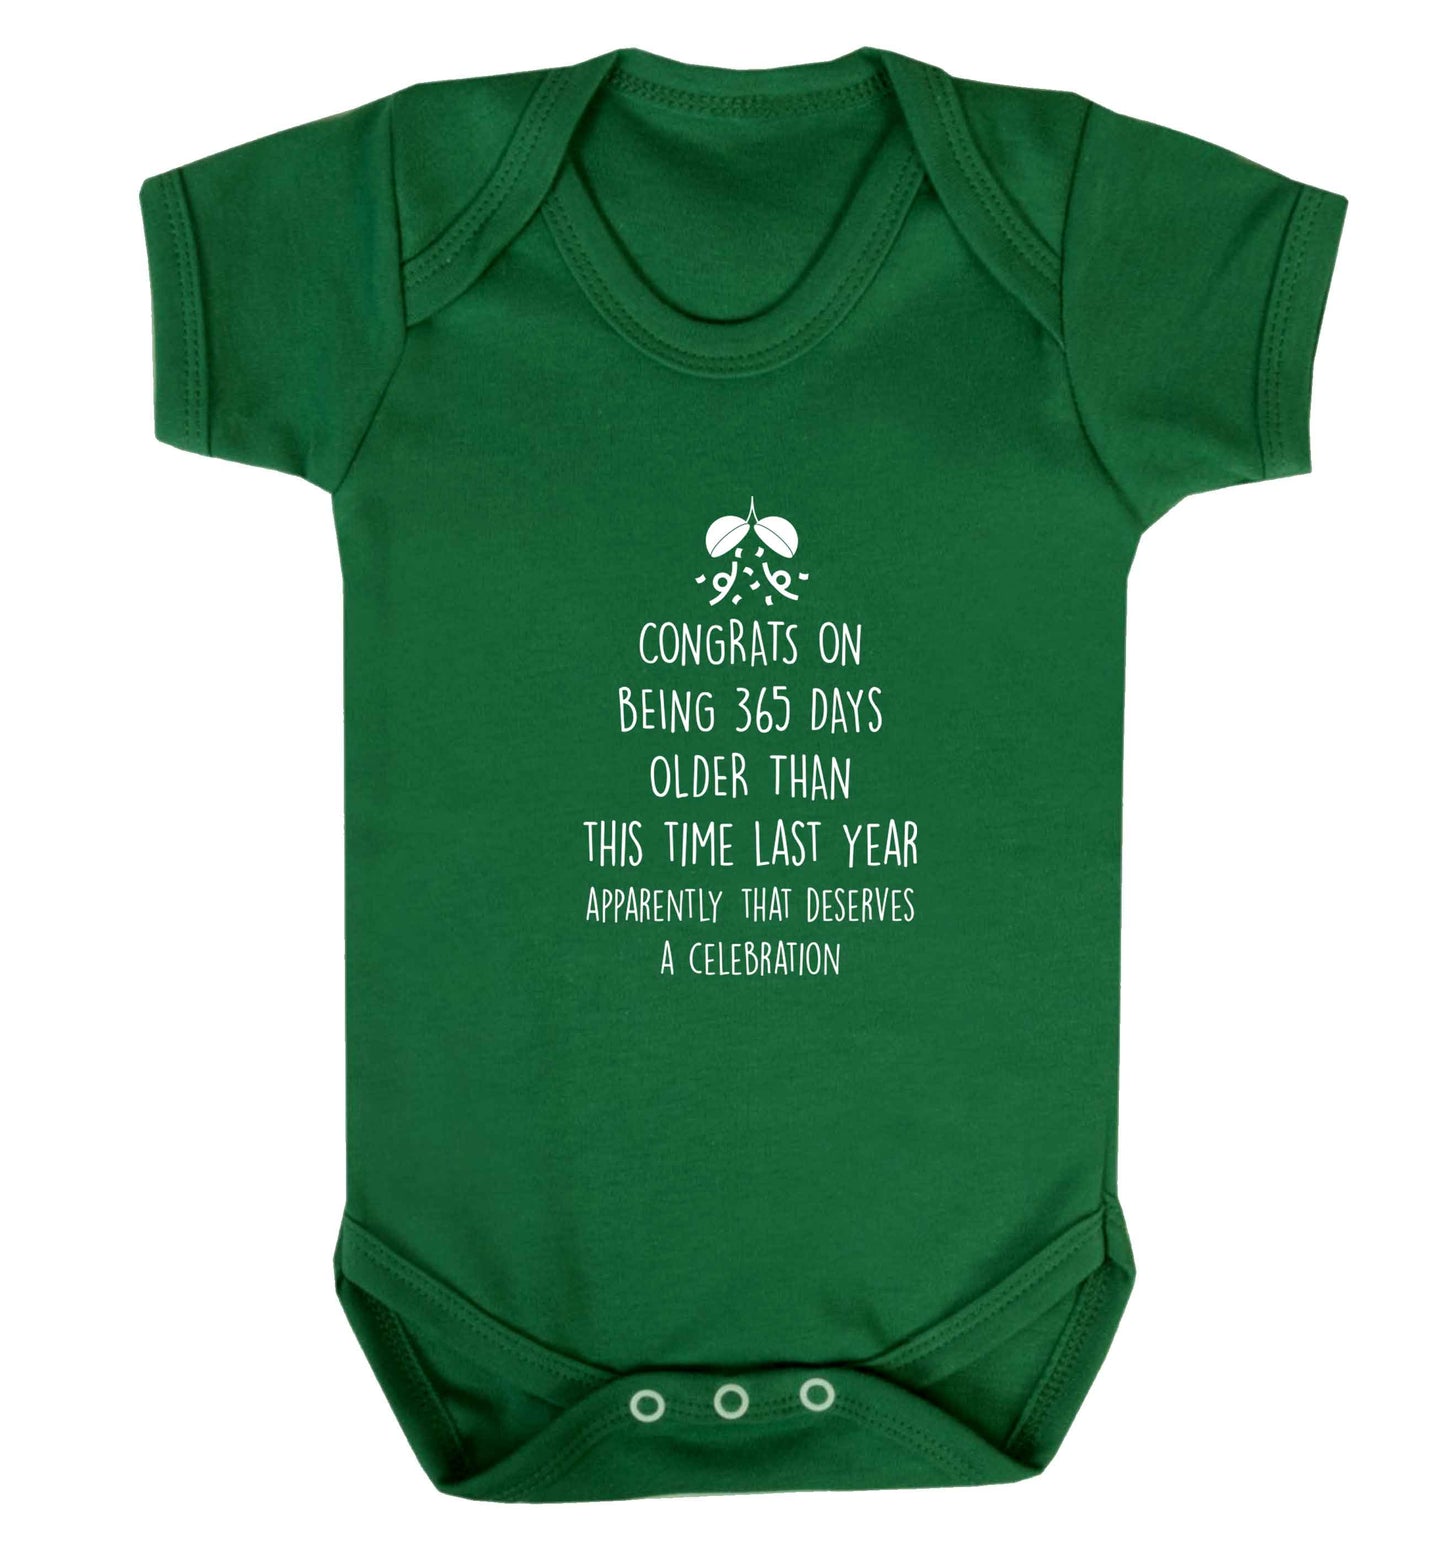 Congrats on being 365 days older than you were this time last year apparently that deserves a celebration baby vest green 18-24 months